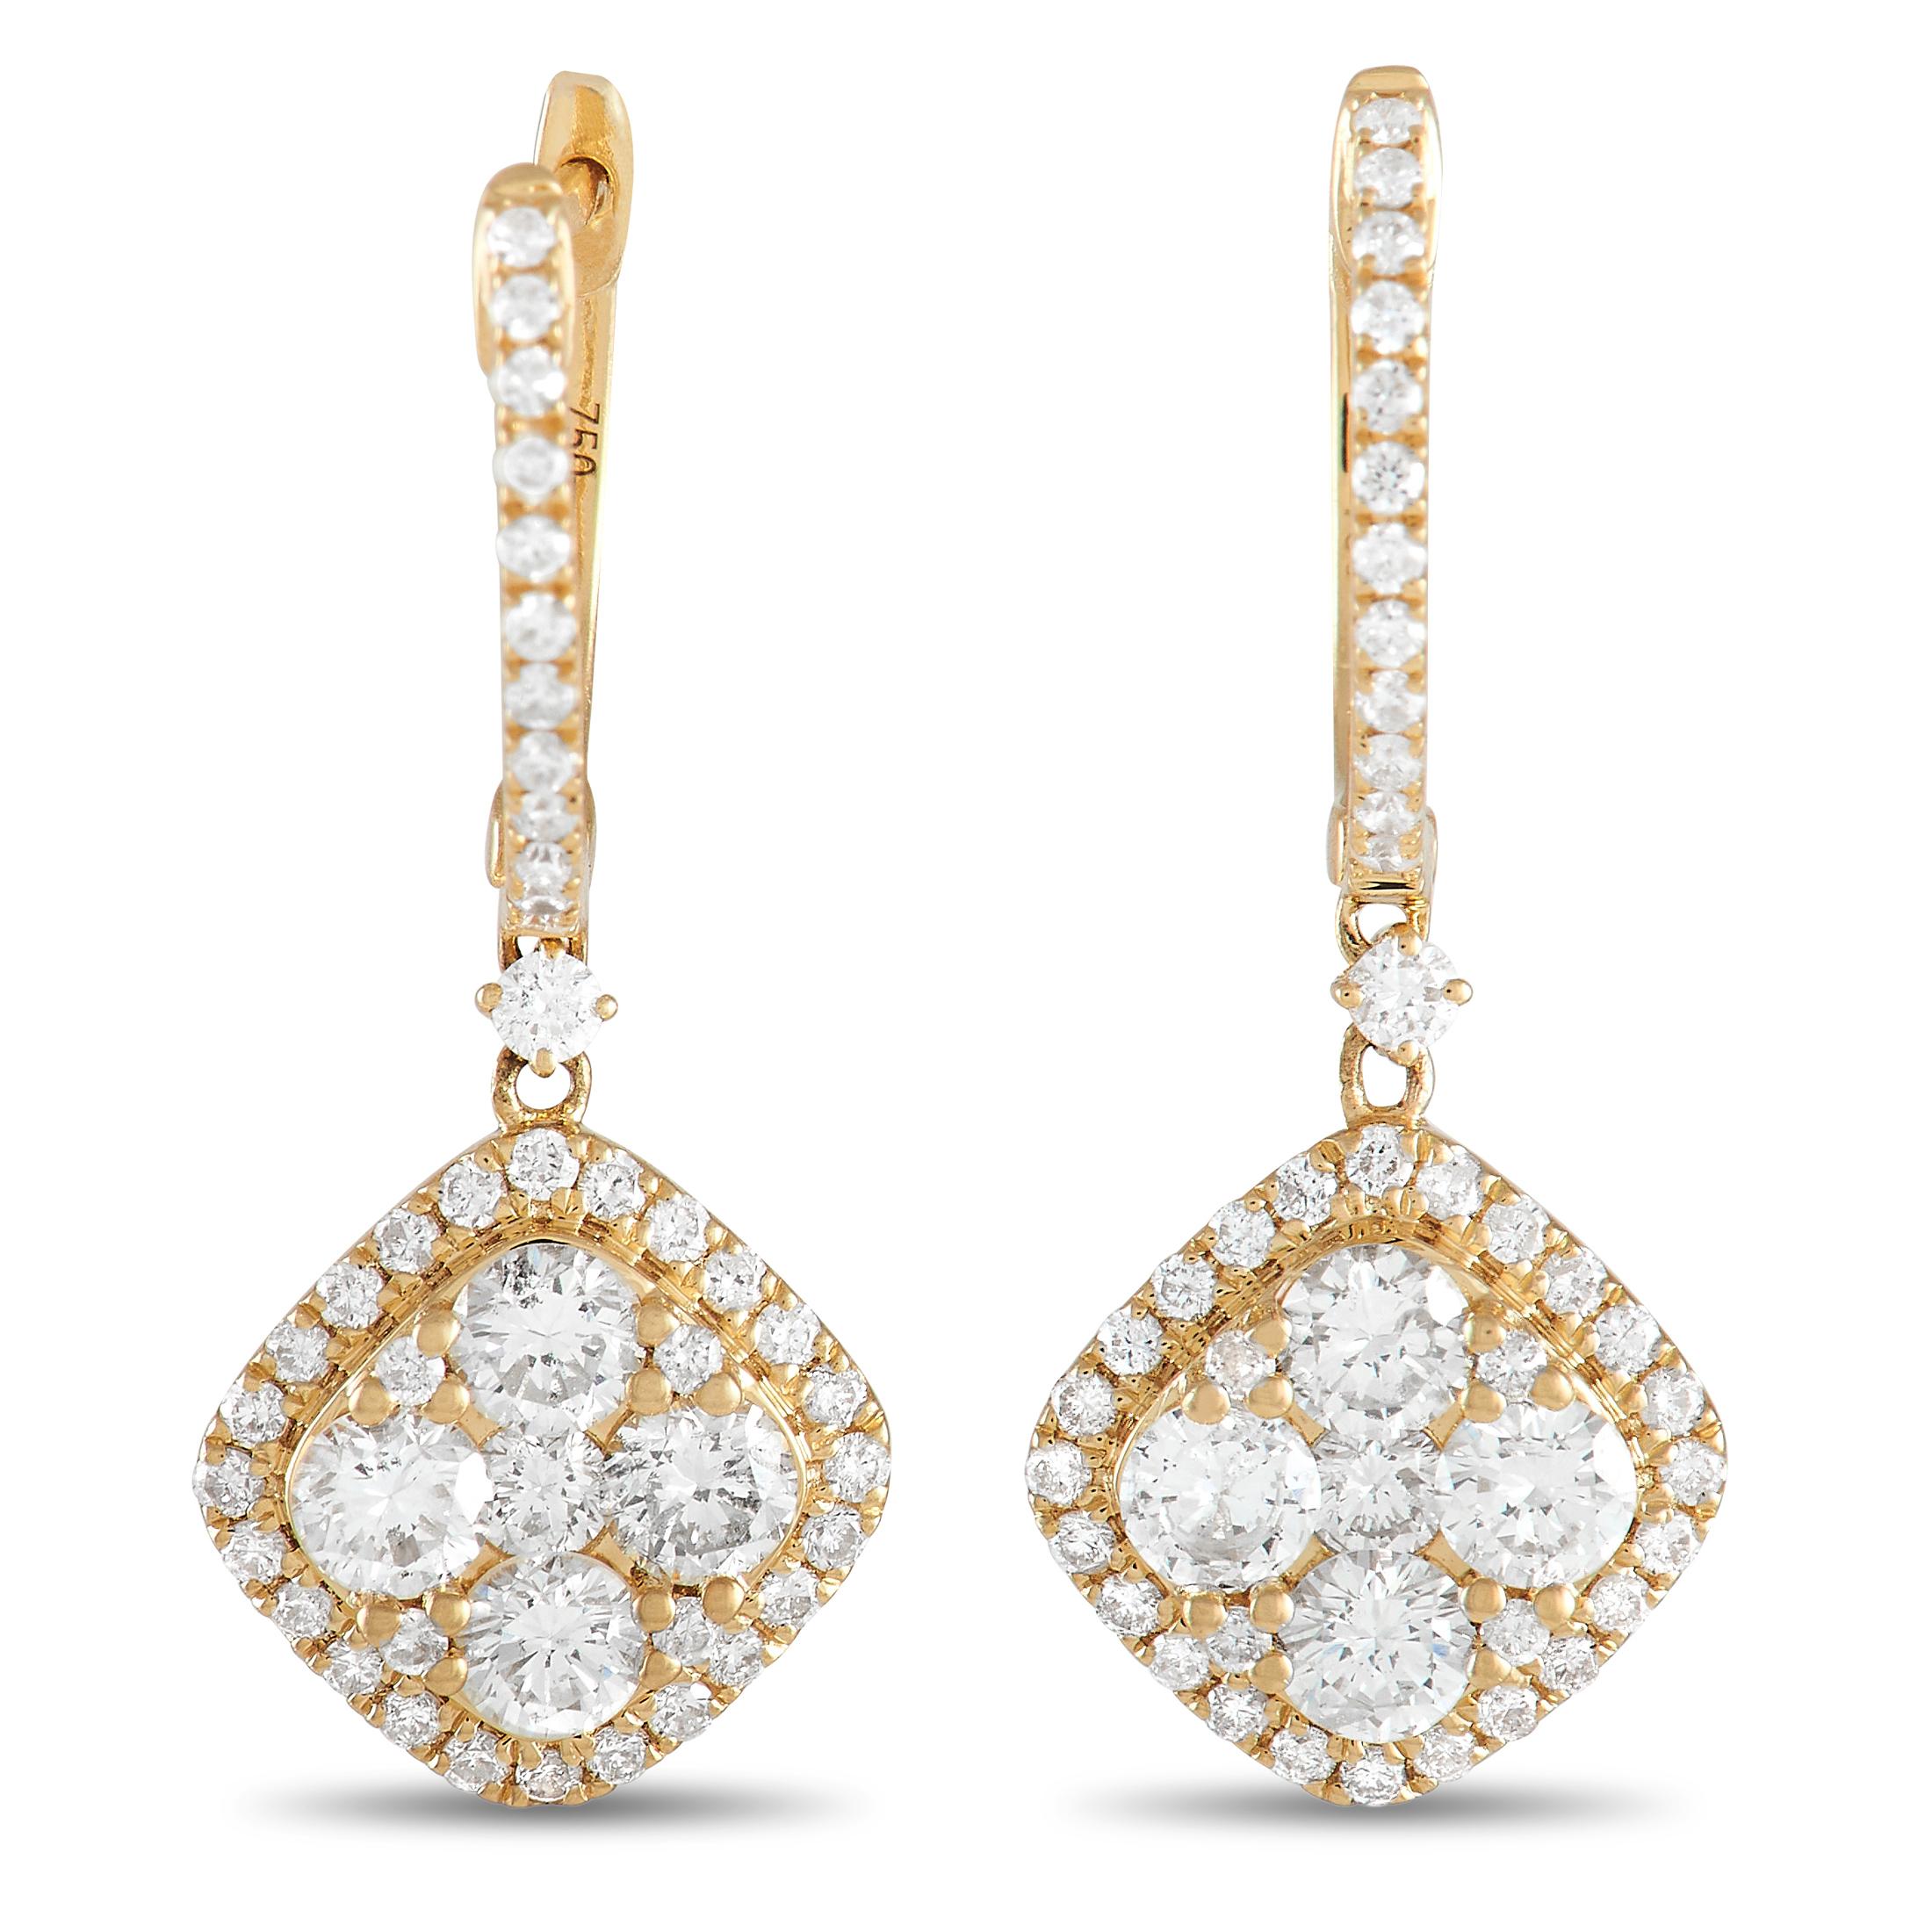 These elegant earrings were designed to make a statement. Stylish and sophisticated, each one features an 18K Yellow Gold setting that measures 1.0” long and 0.50” wide. Diamonds with a total weight of 1.77 carats allow them to continually catch the